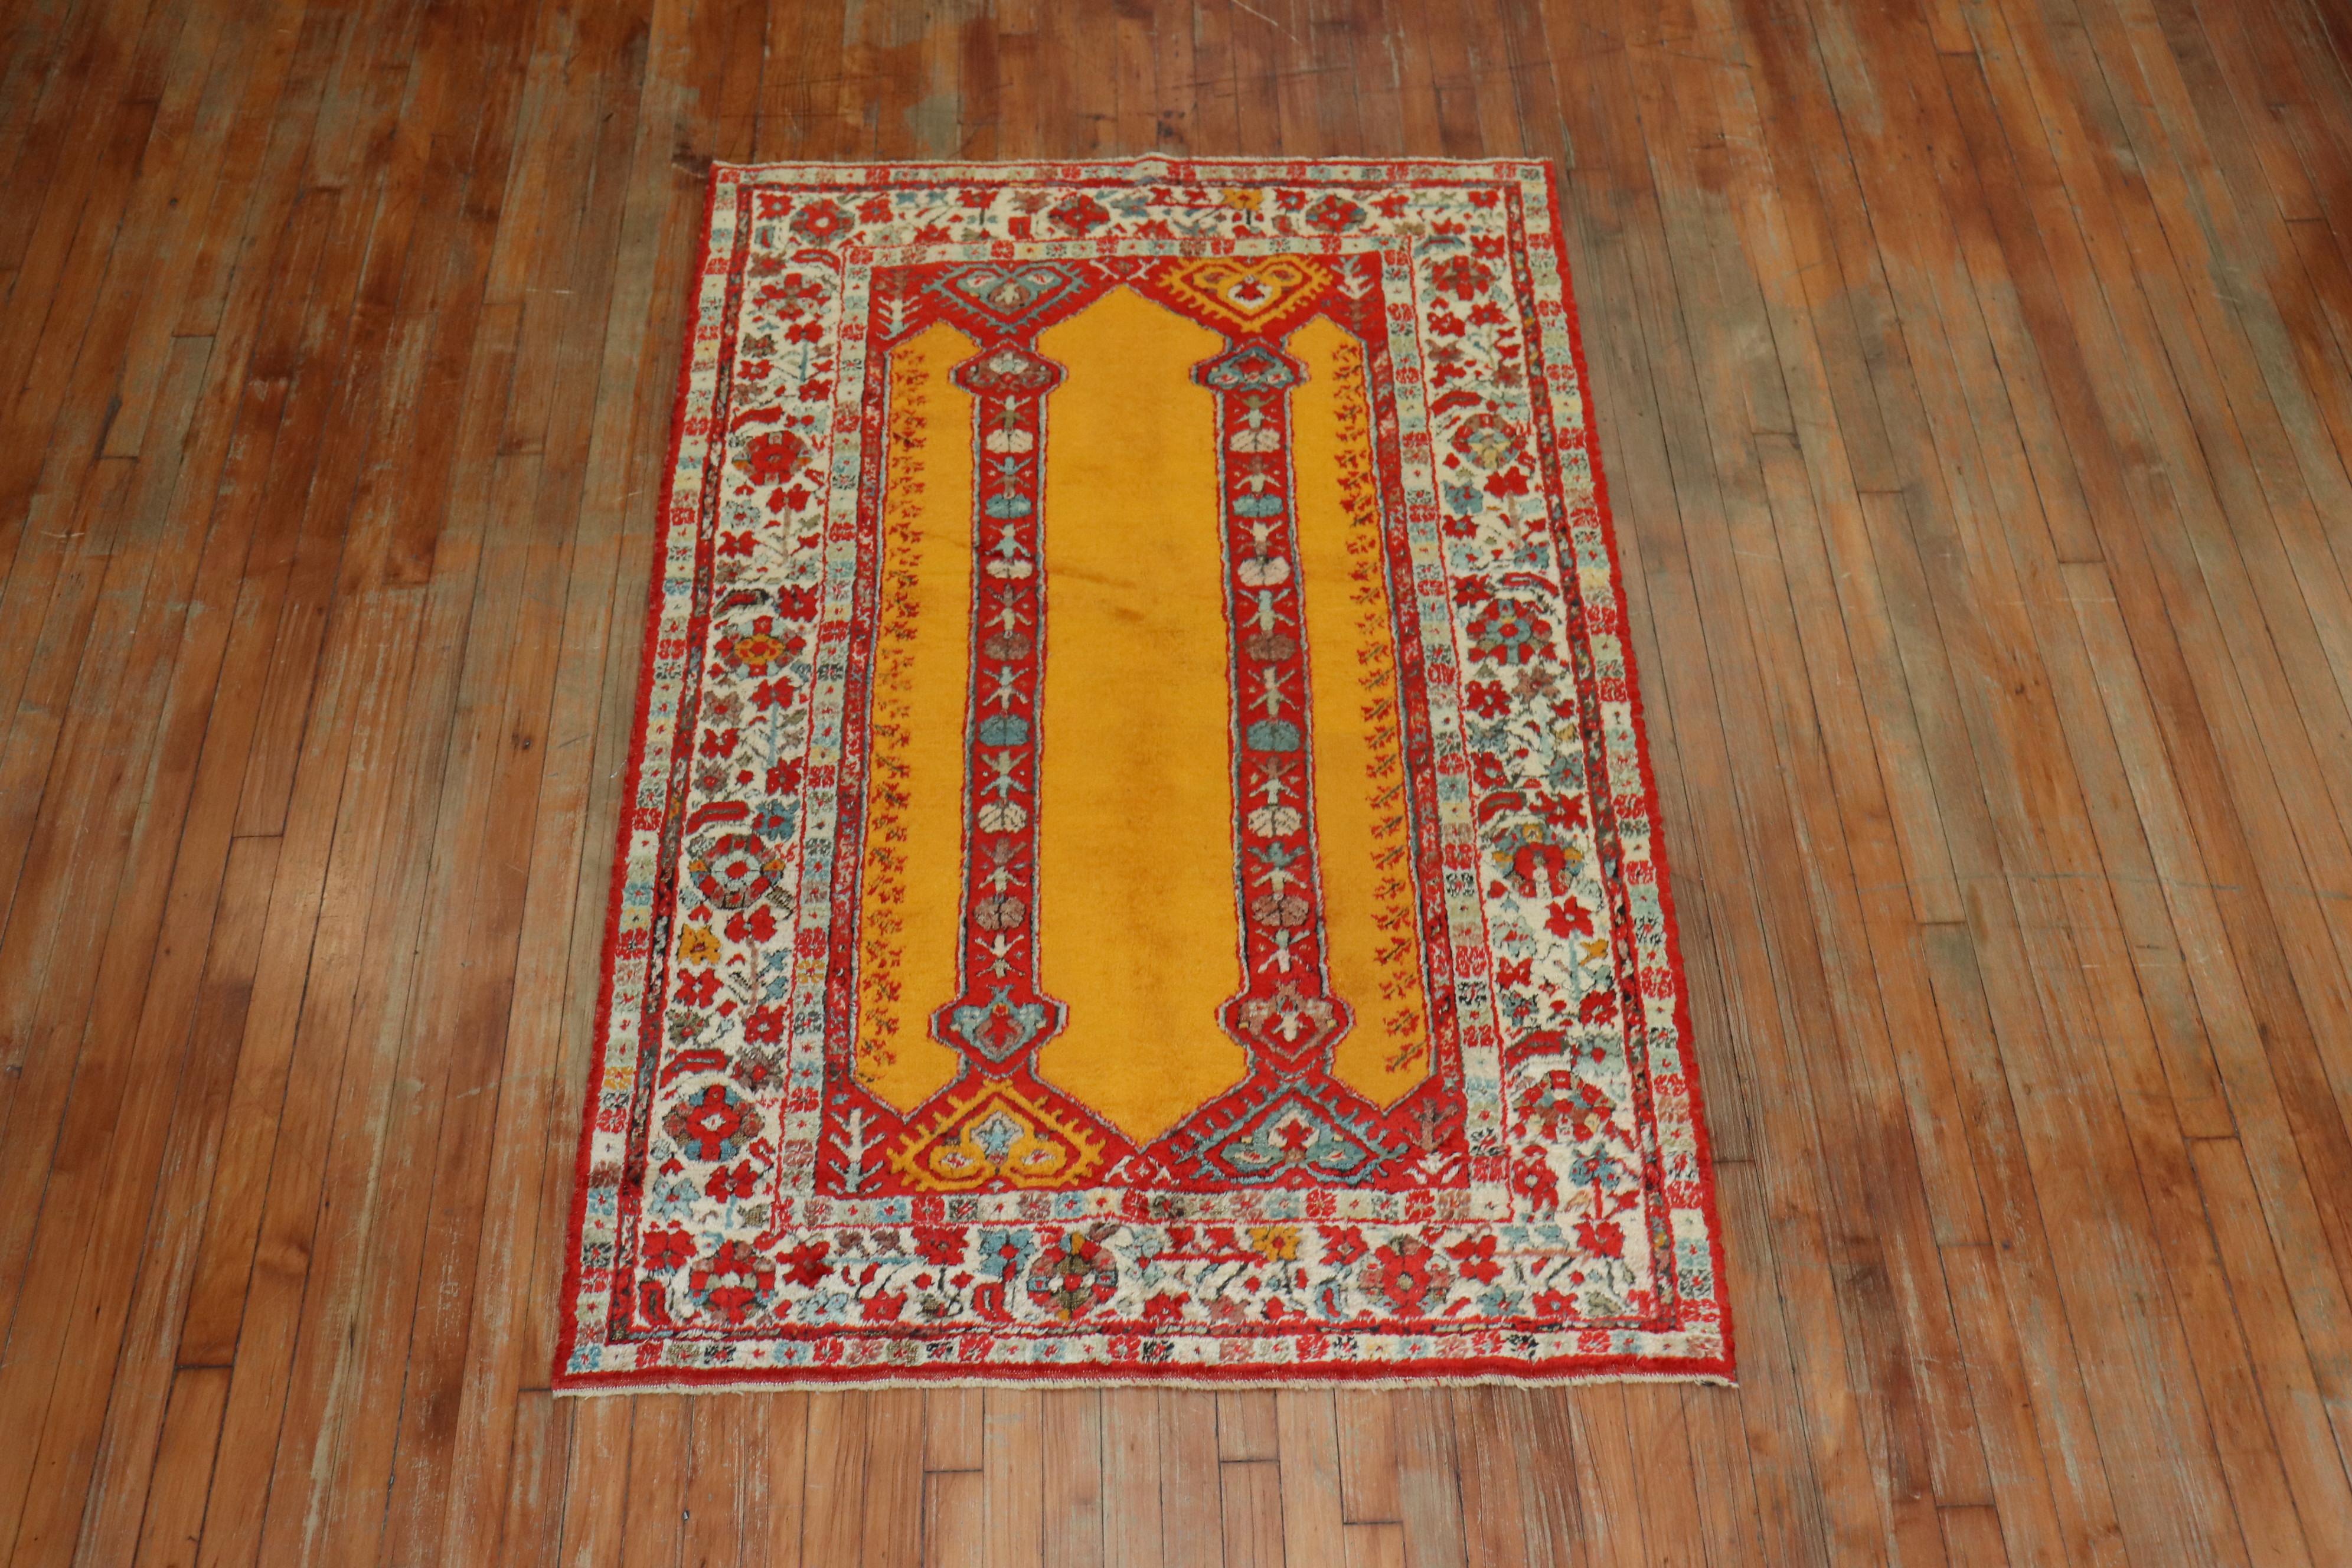 An early 20th century angora wool Oushak rug with a bright saffron color field with a double scroll column prayer motif. This is a genuine piece woven with angora goat wool and it’s an antique. There is no noticeable repairs or any condition issues